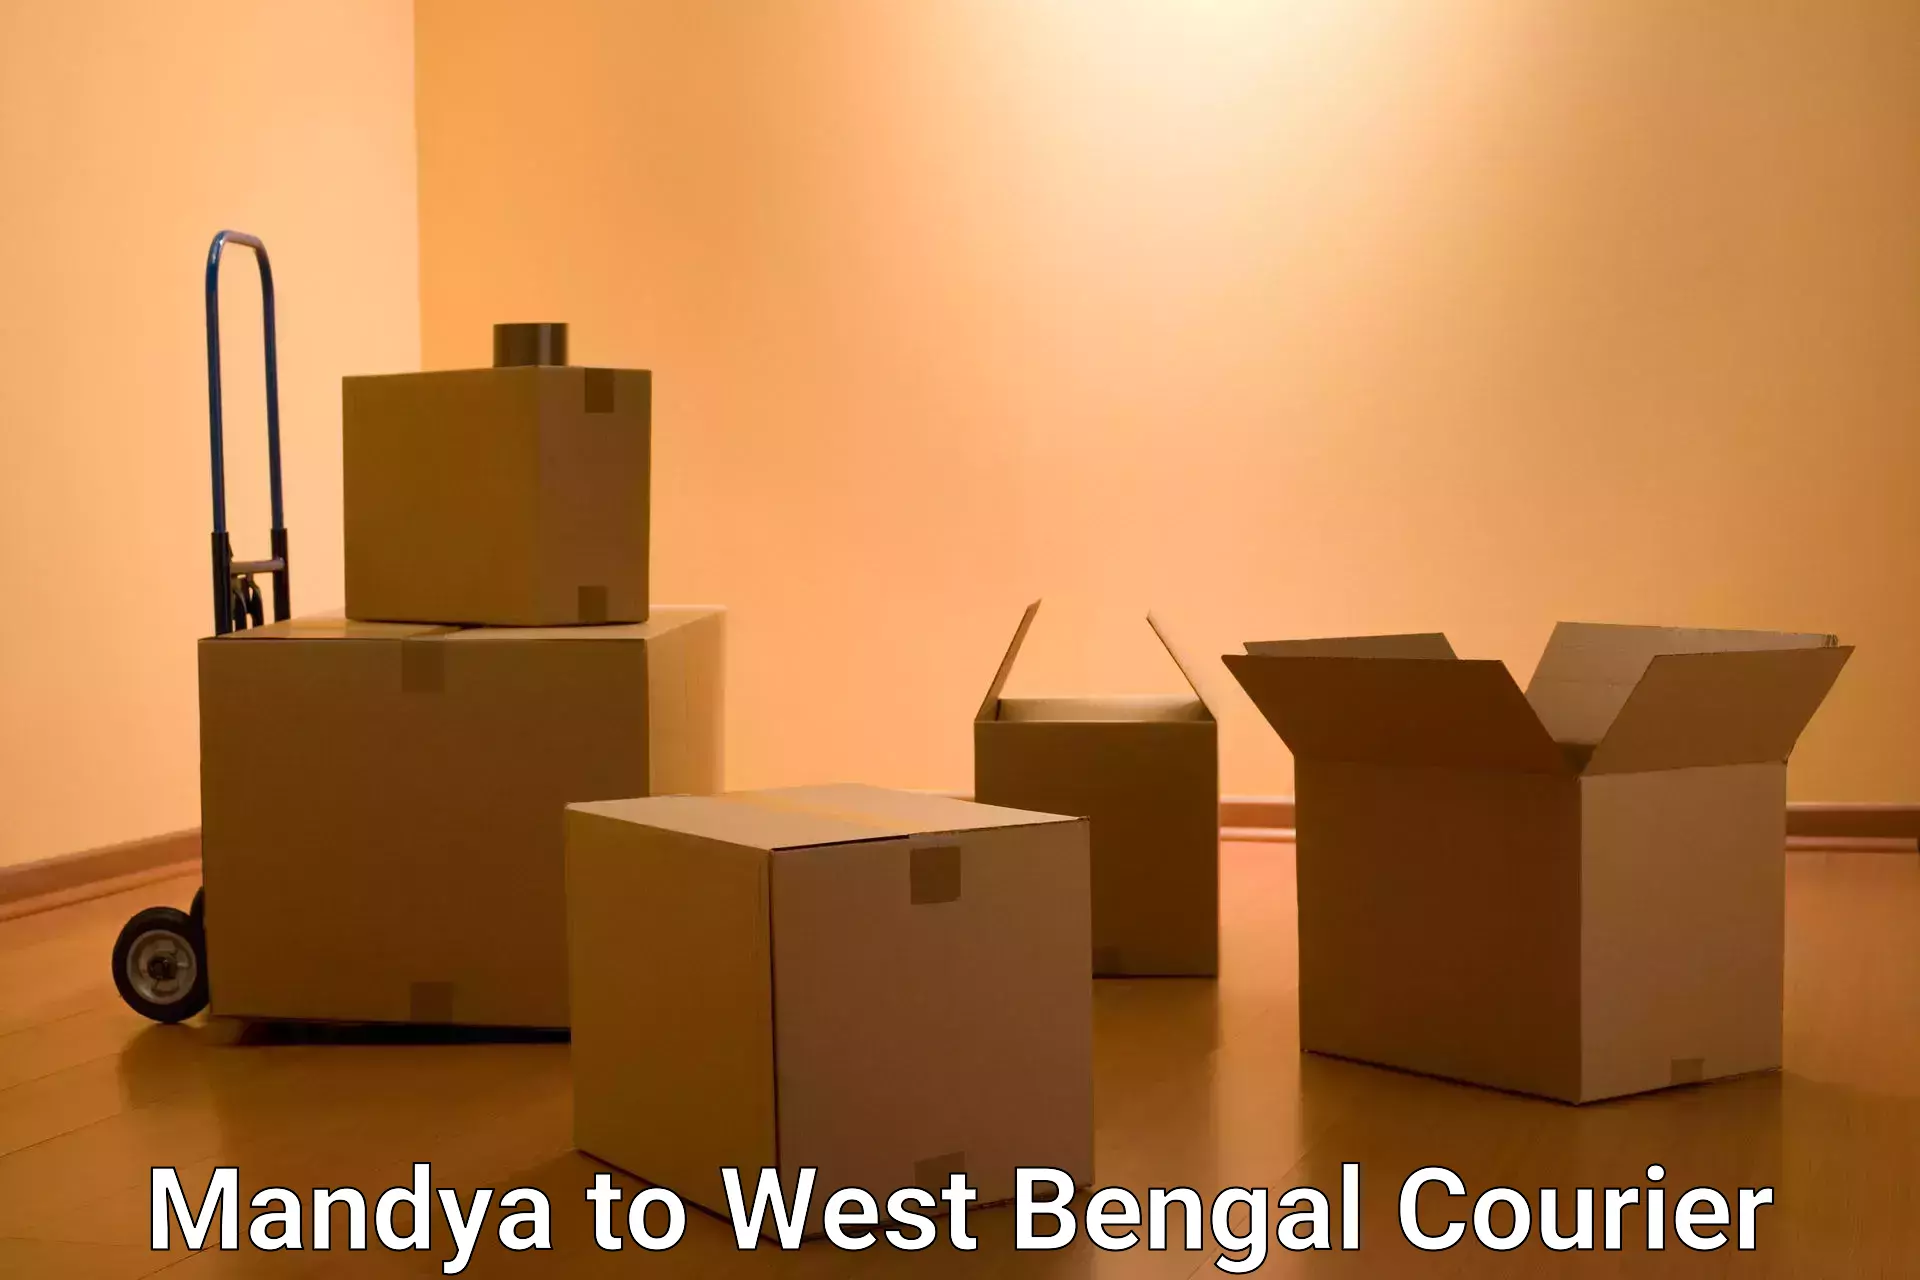 Delivery service partnership Mandya to West Bengal